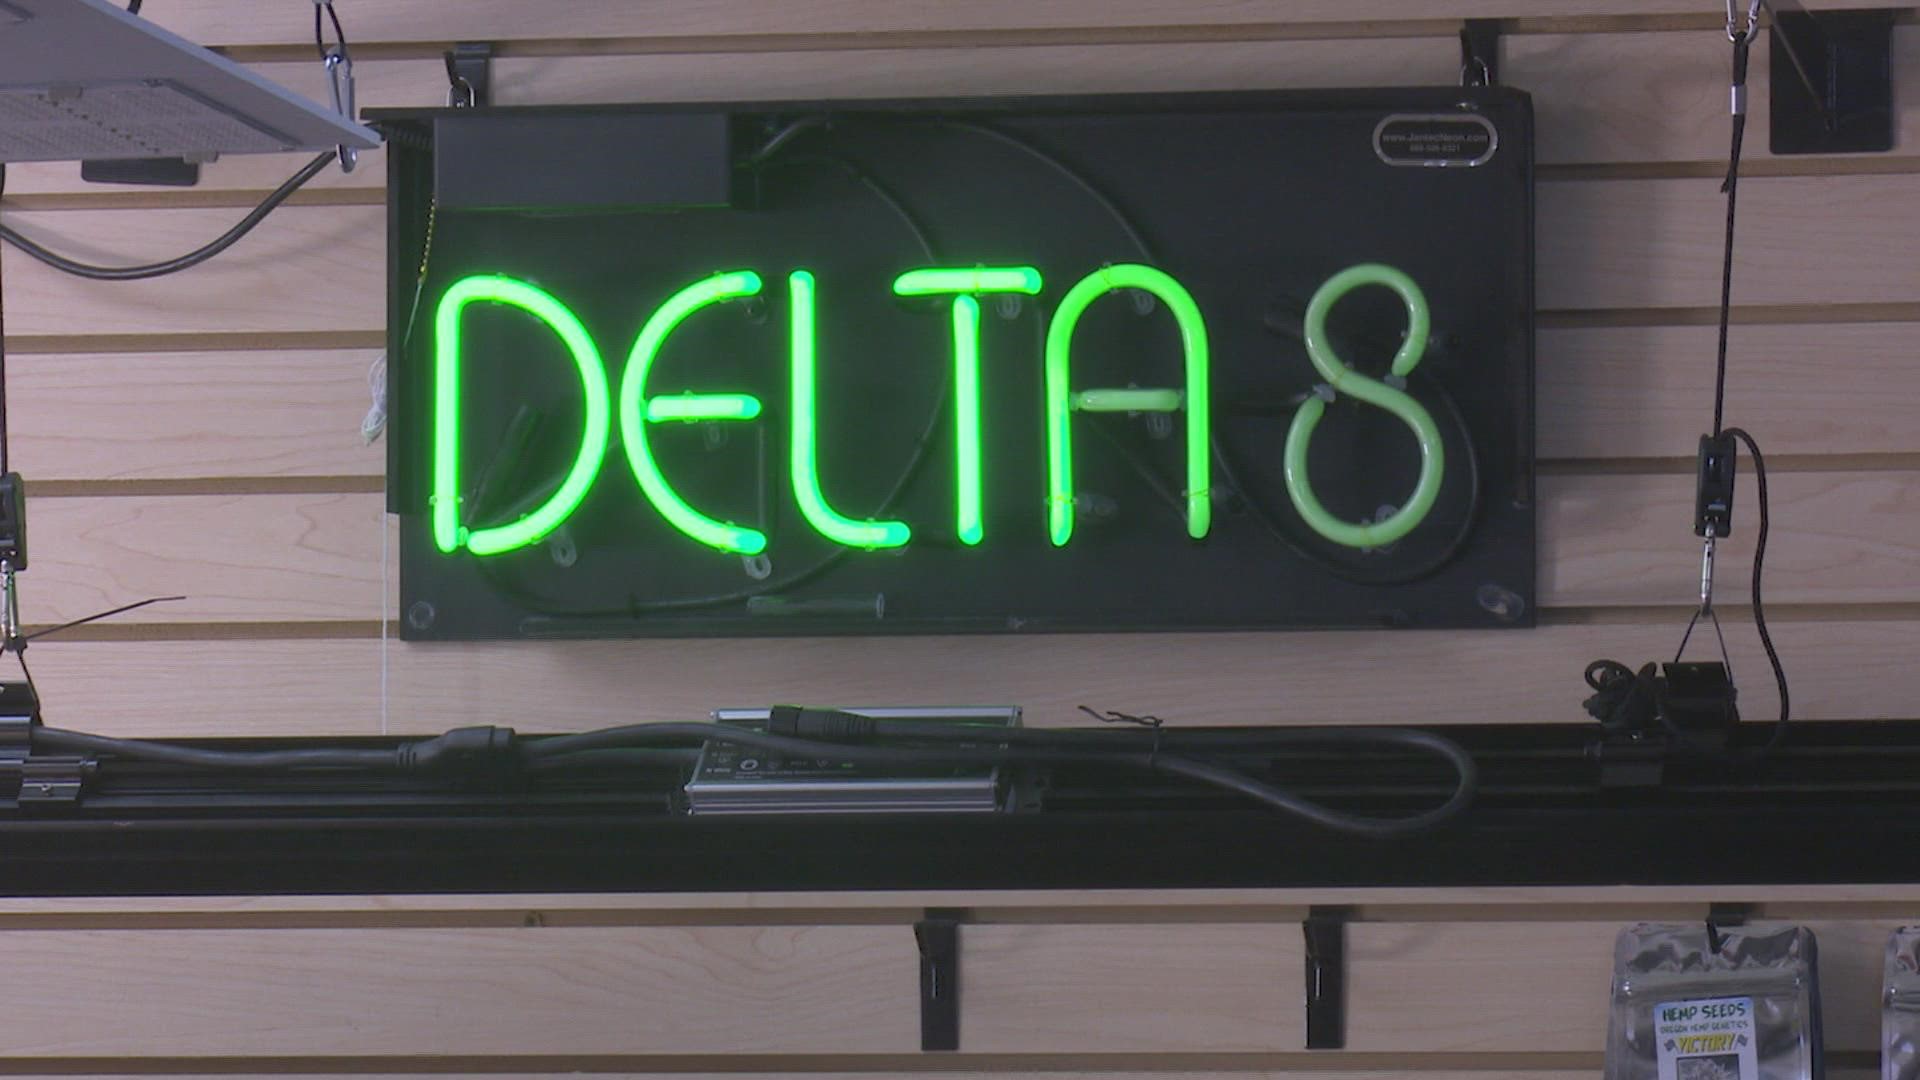 A Houston CEO is suing the state health department to stop its ban on Delta-8 after the cannabis extract was added to its controlled substances list.